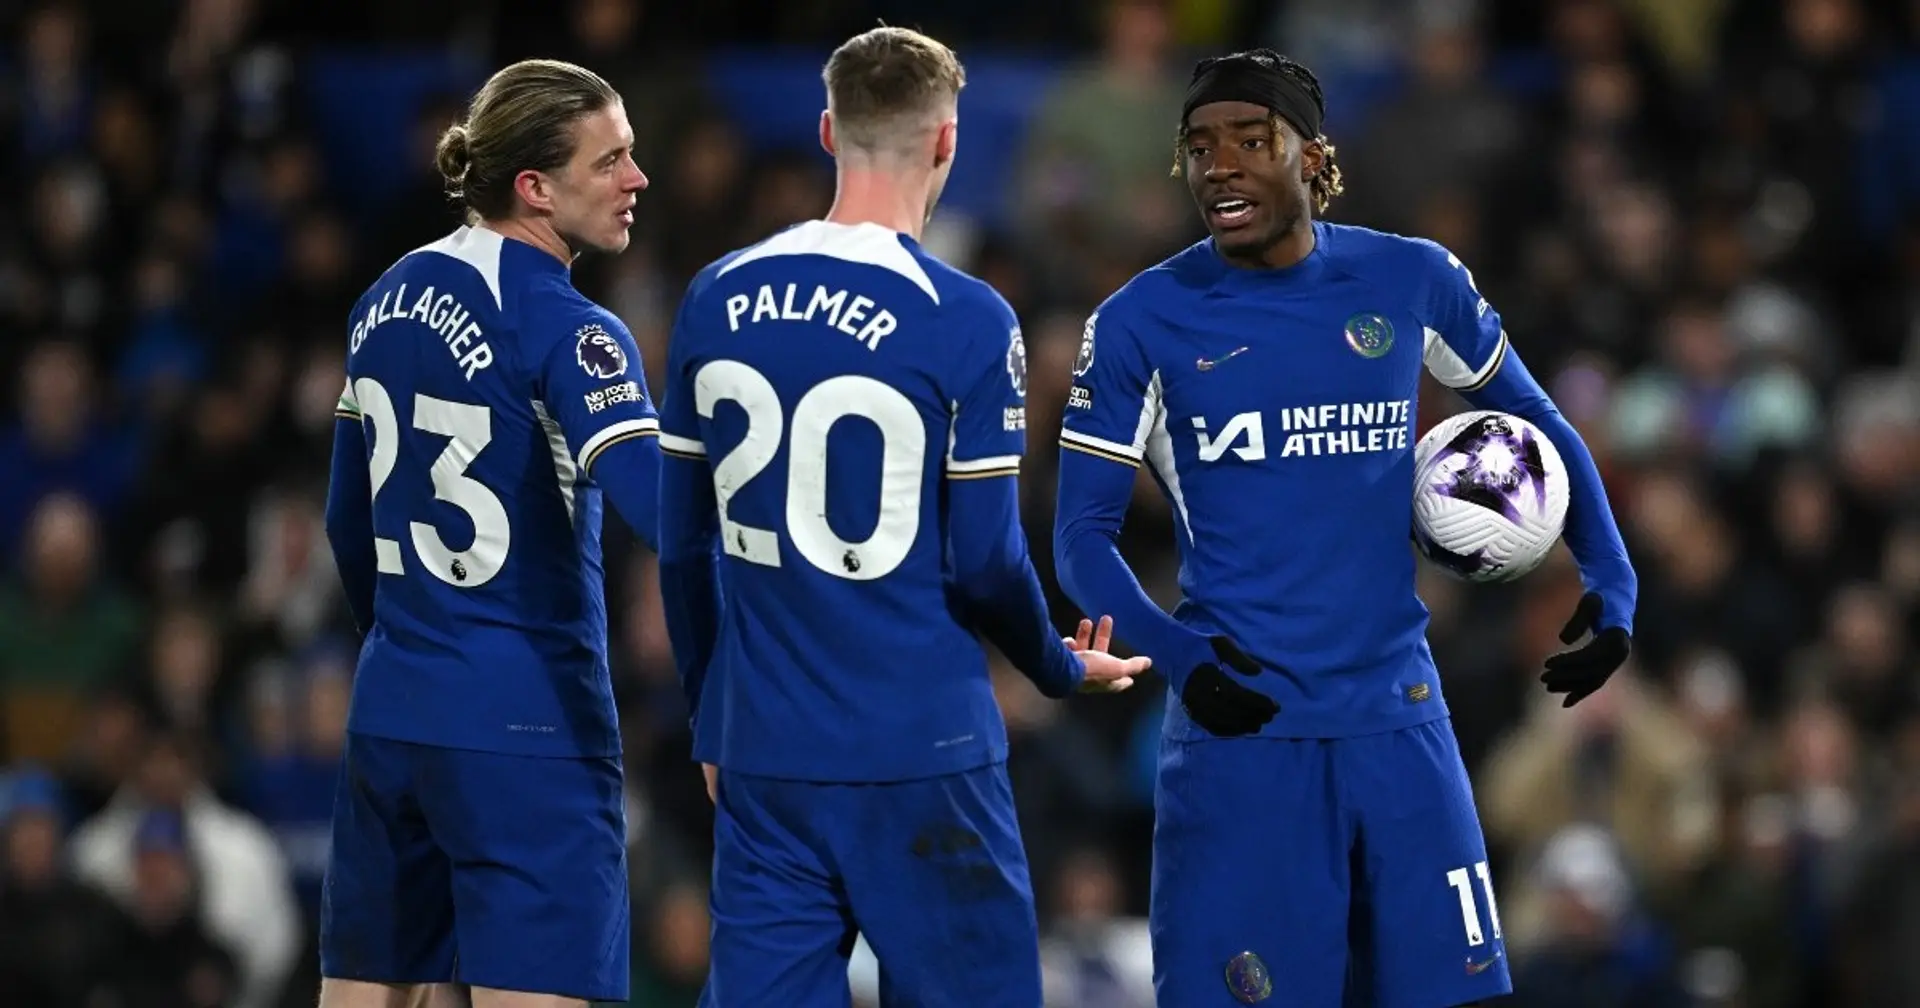 'Chelsea dressing room is a cesspit of overinflated egos': Chris Sutton slams Blues over penalty incident